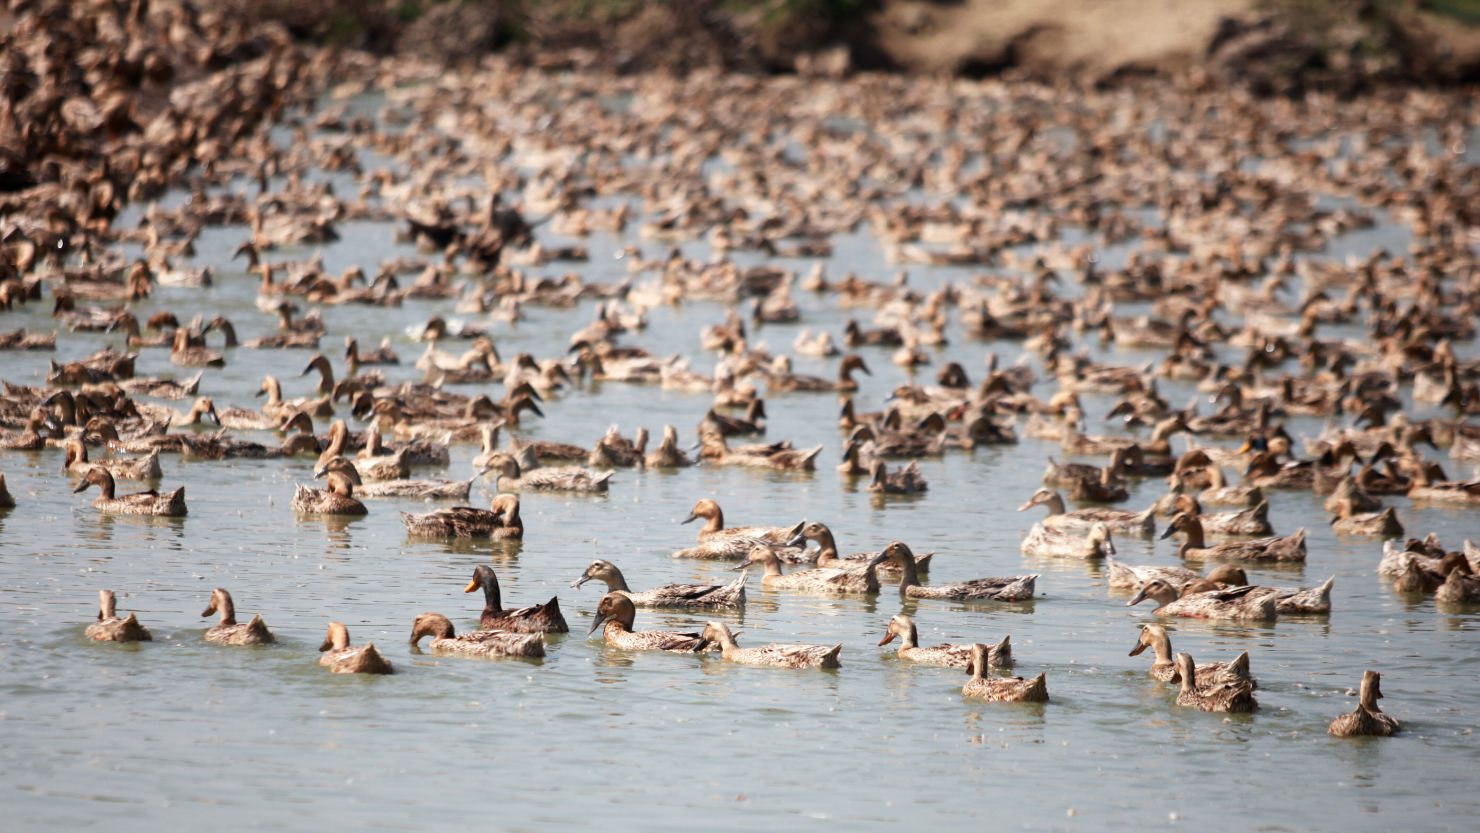 Ducks swim in the water at a breeding base in Gaoyou, China.  